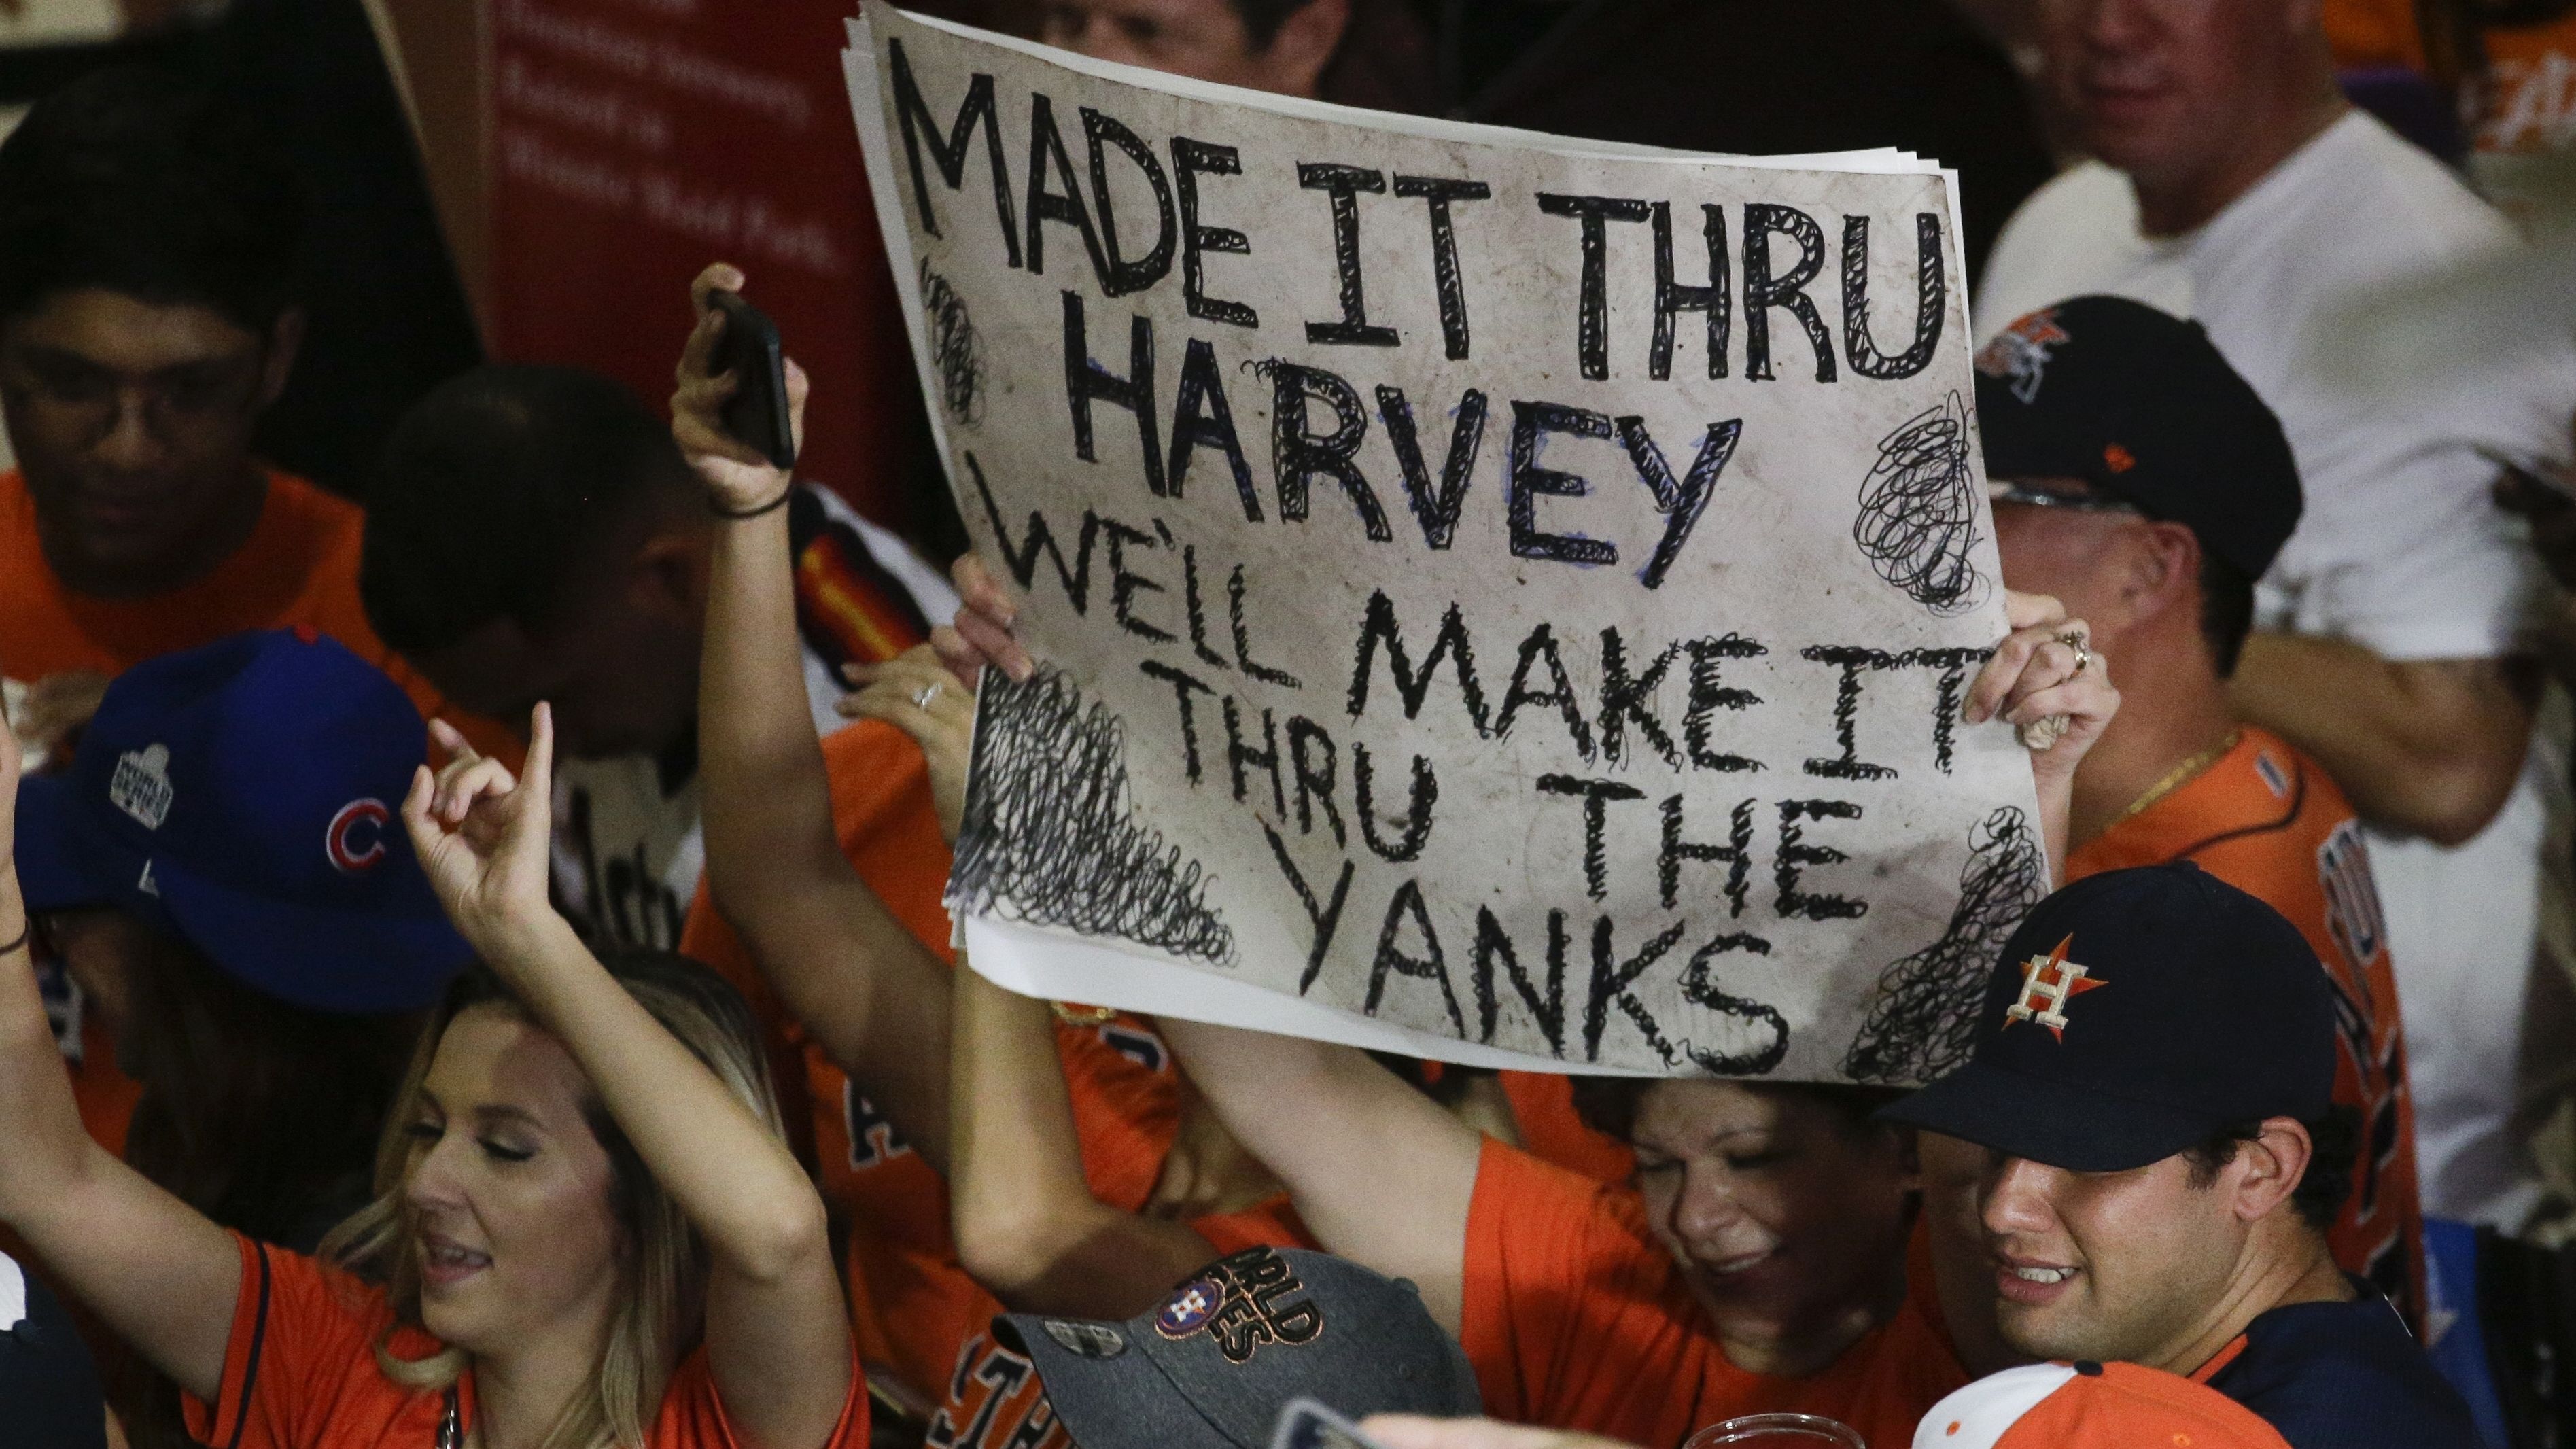 Astros reflect on 'Houston Strong' spirit a year after Harvey